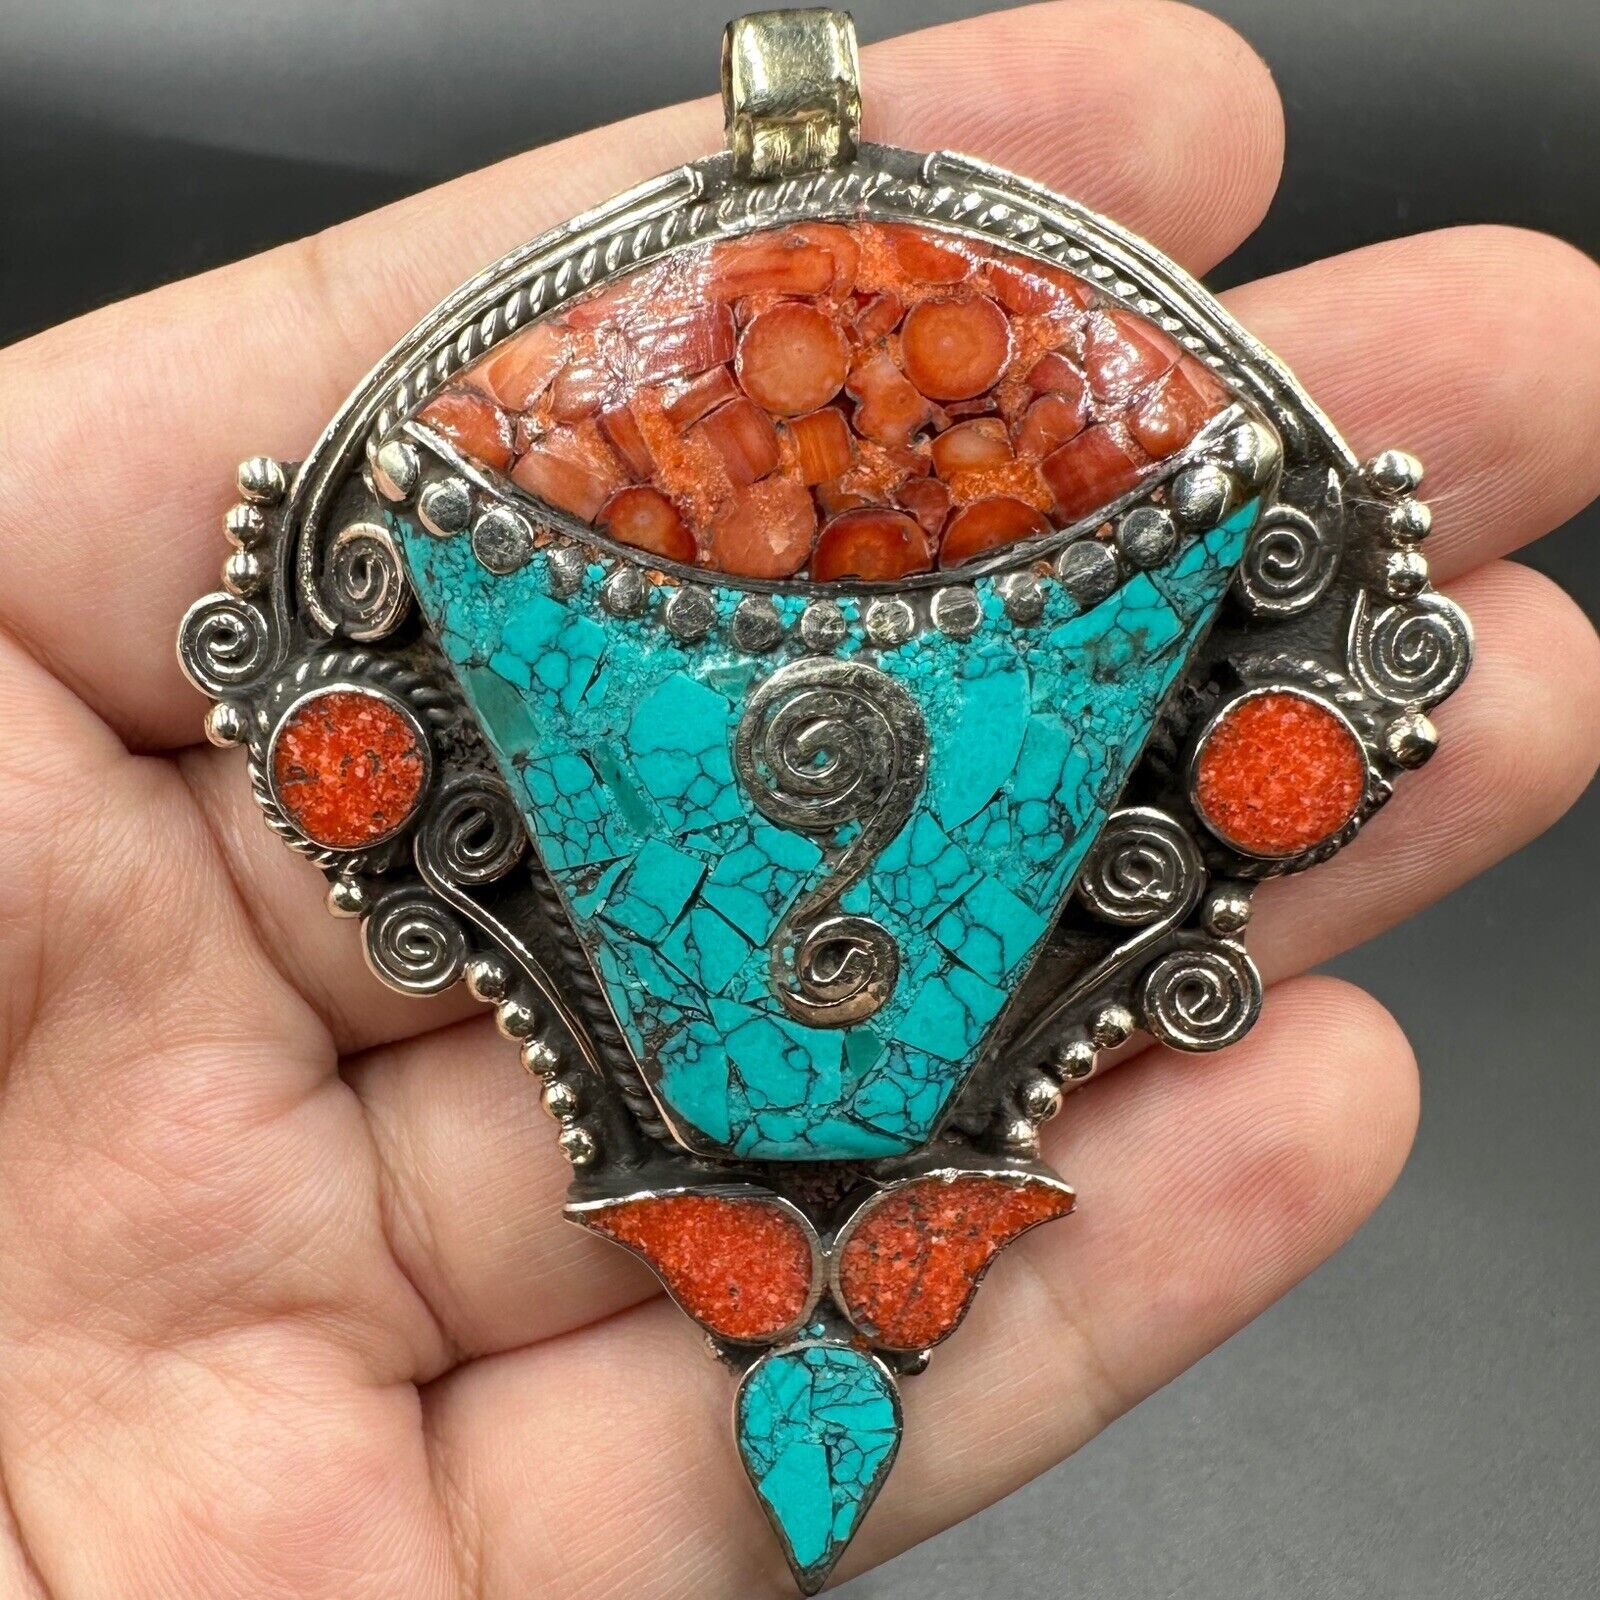 Very unique Vintage Tibetan Silver plated pendant with Turquoise & Coral Stone